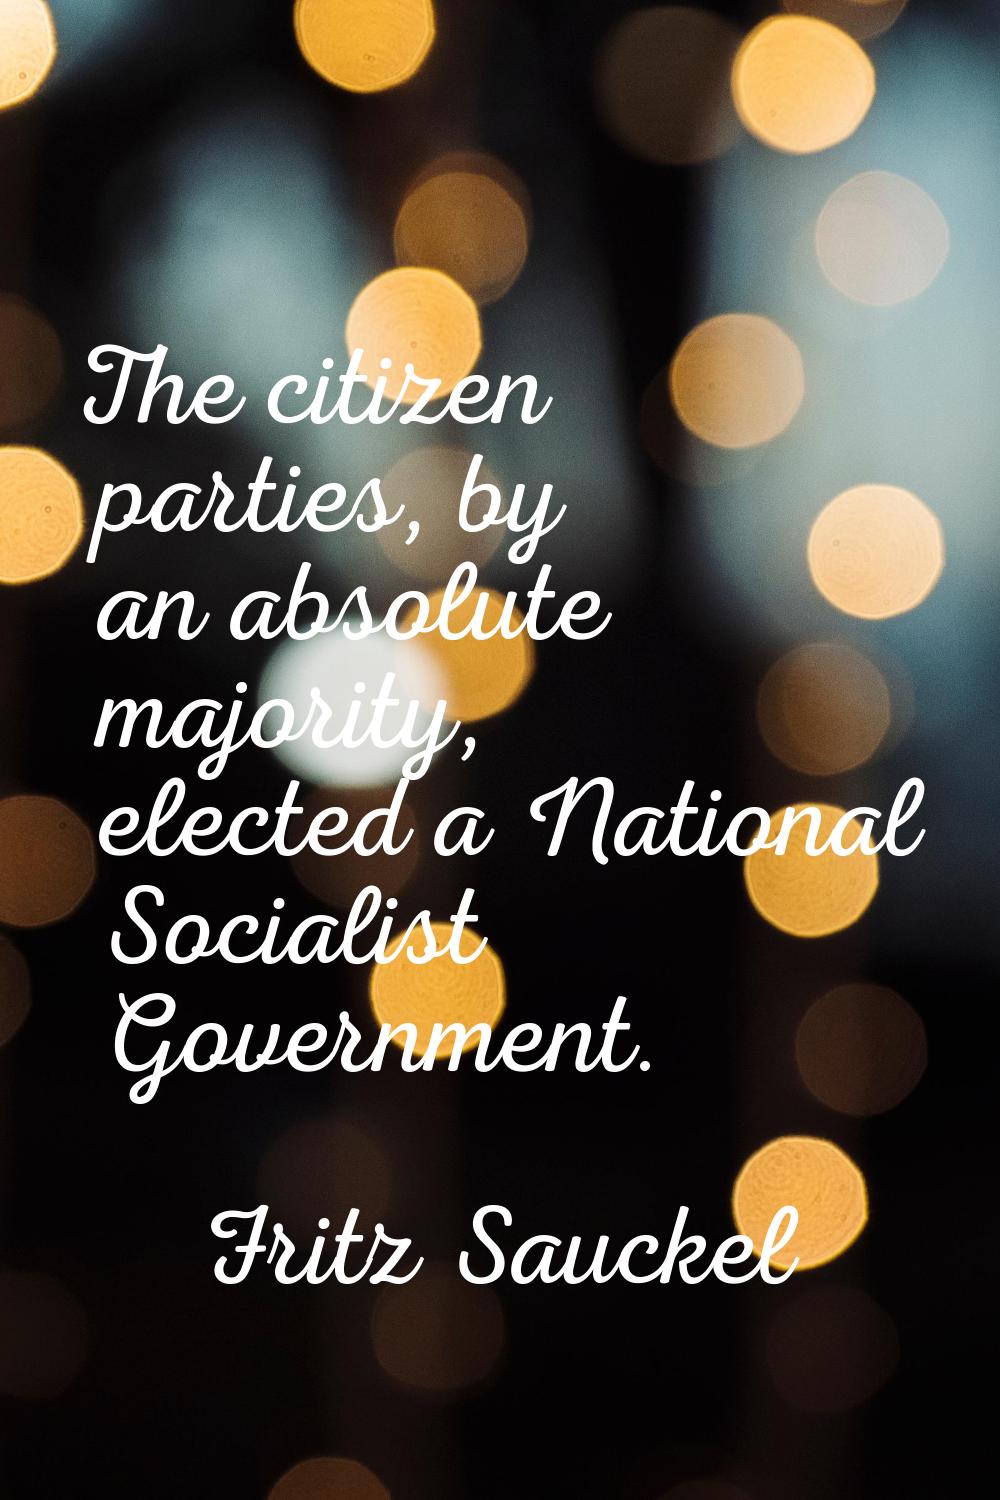 The citizen parties, by an absolute majority, elected a National Socialist Government.